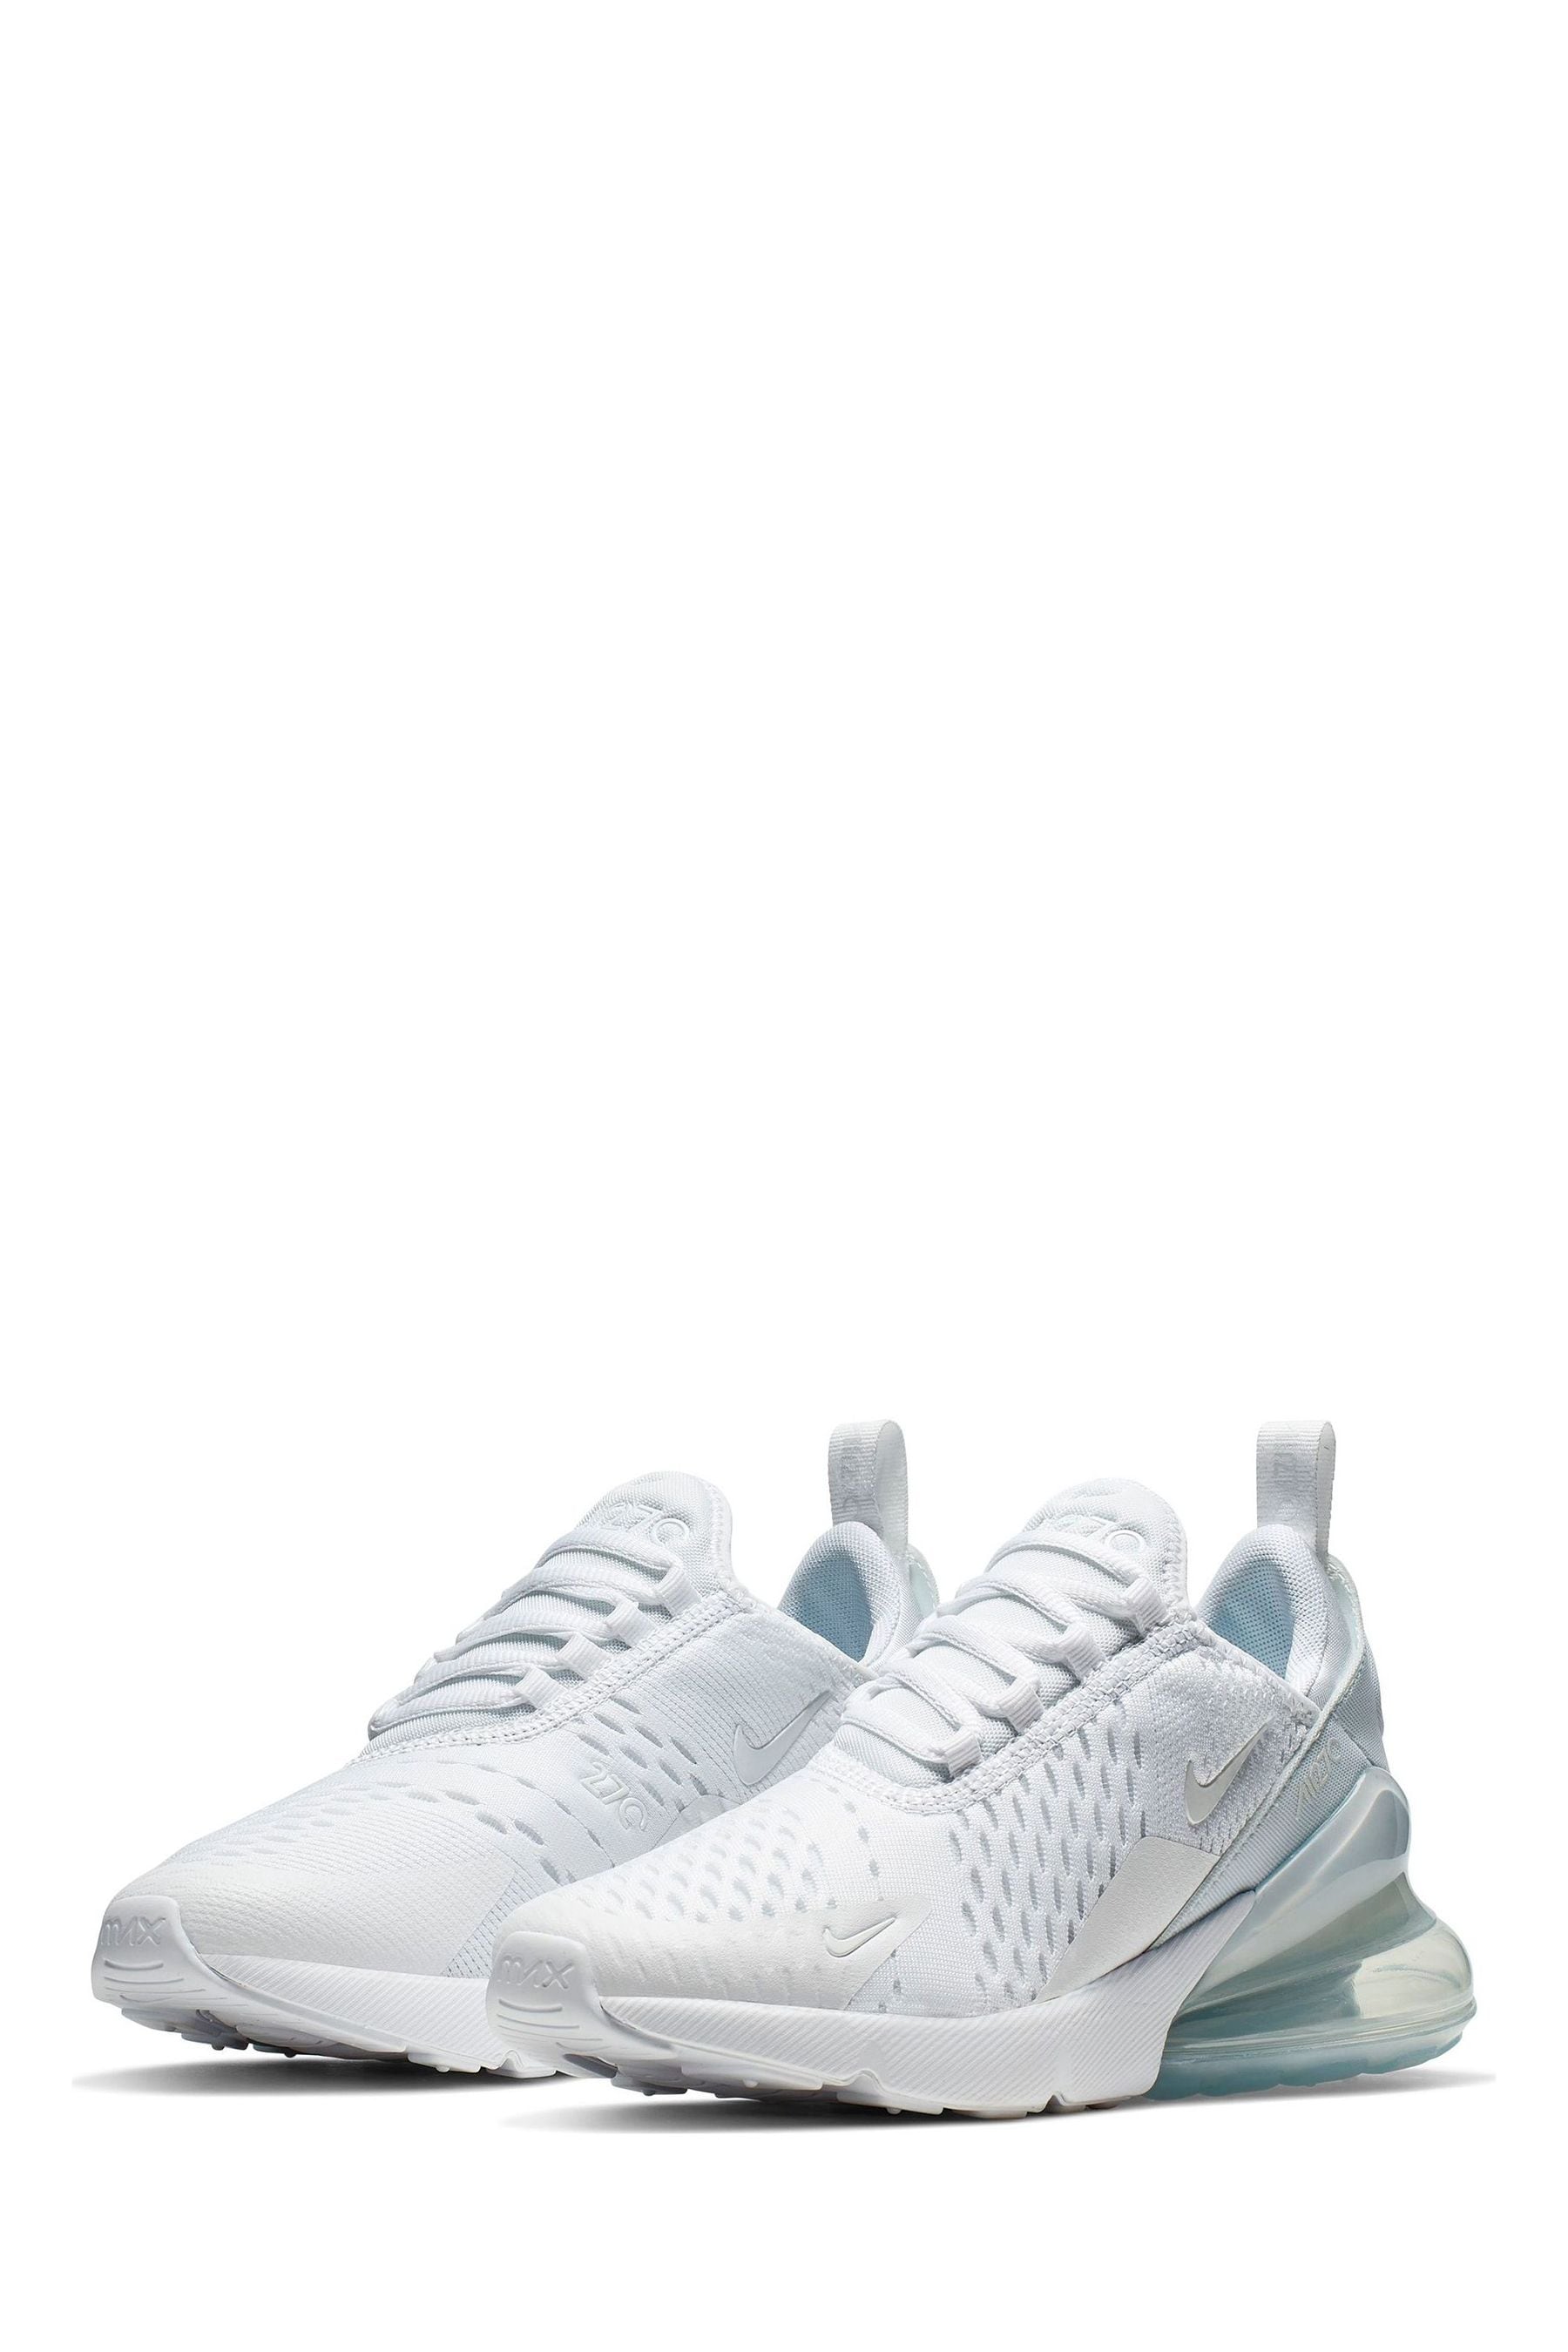 Buy Nike White/Pale Aqua Air Max 270 Youth Trainers from the Next UK ...